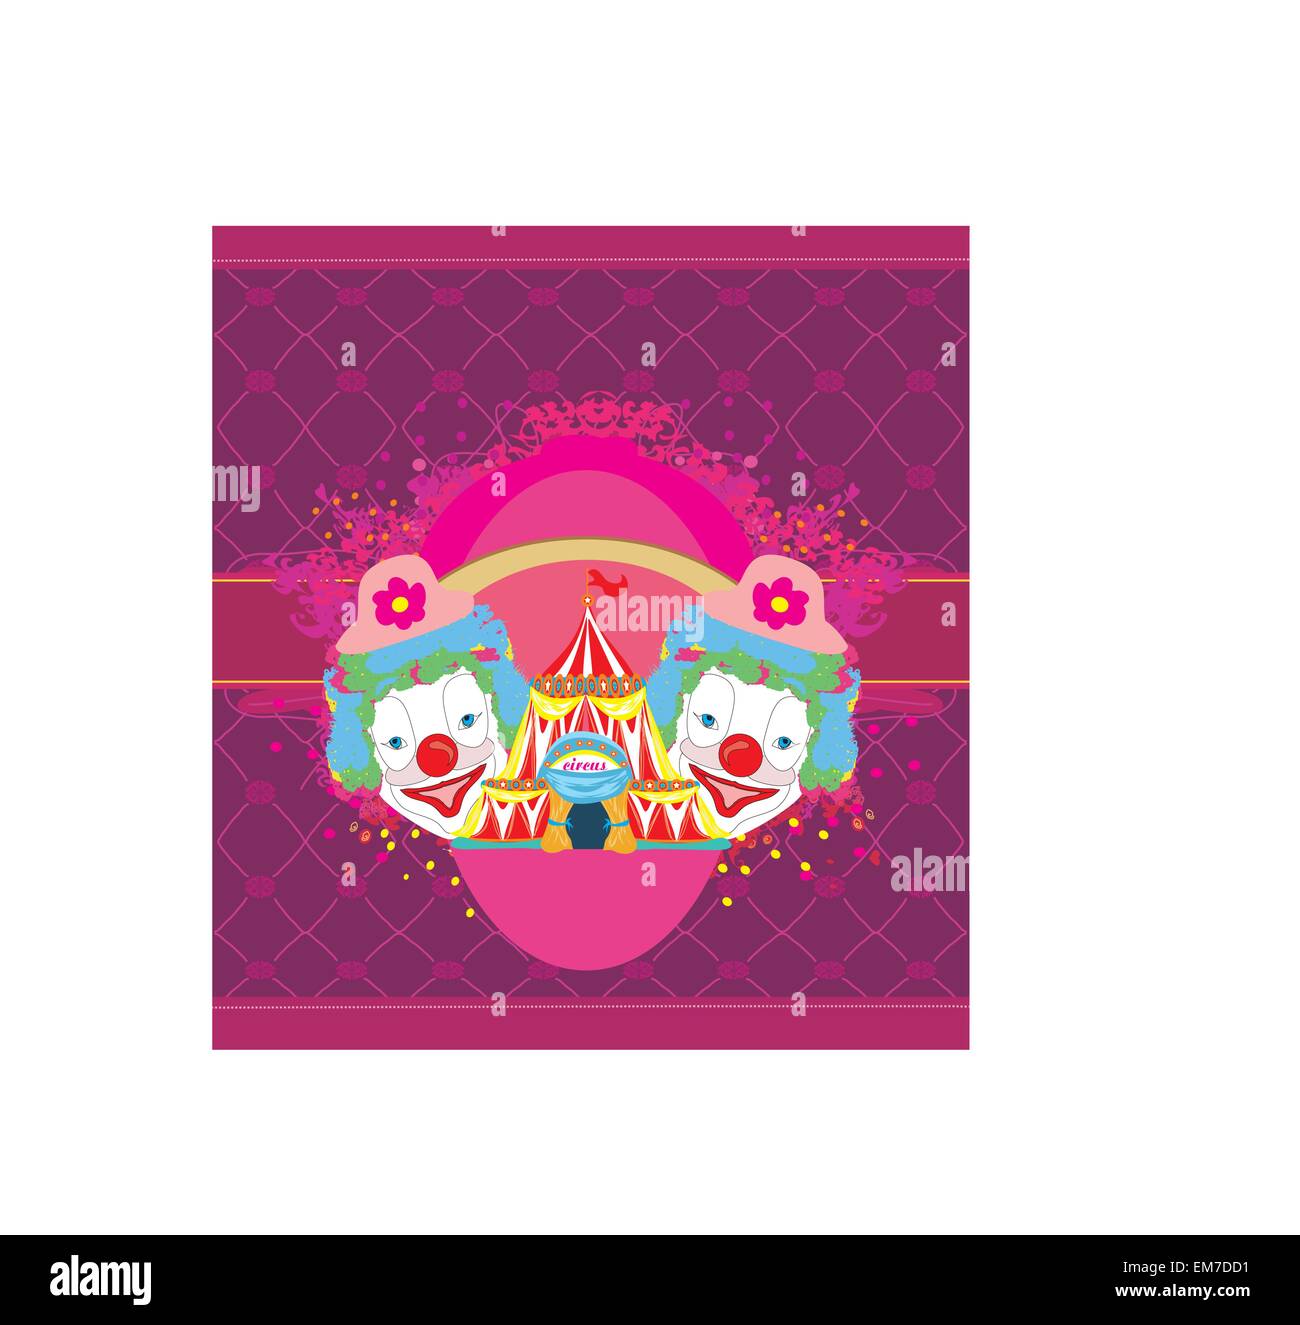 Clowns Stock Vector Images - Alamy